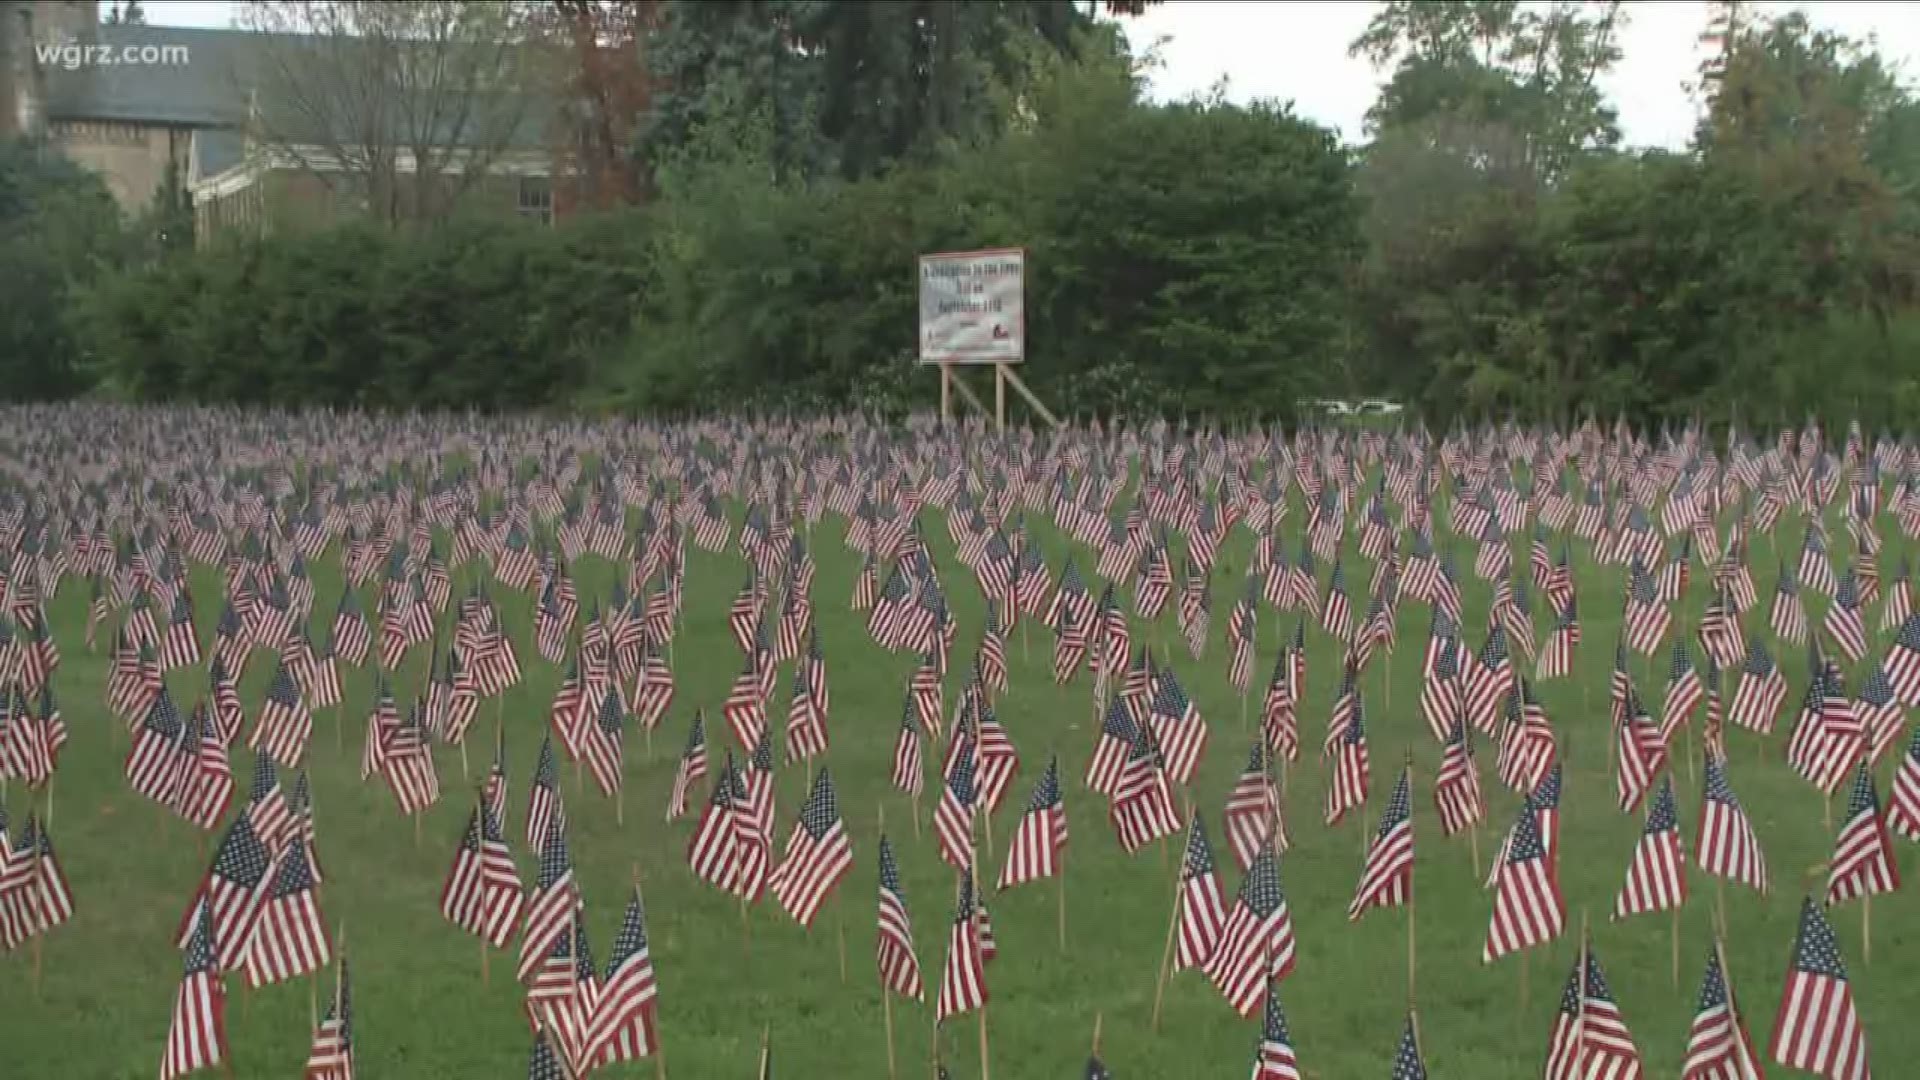 Three thousand flags on your front lawn. All of them represent a victim who lost his or her life 18 years ago.